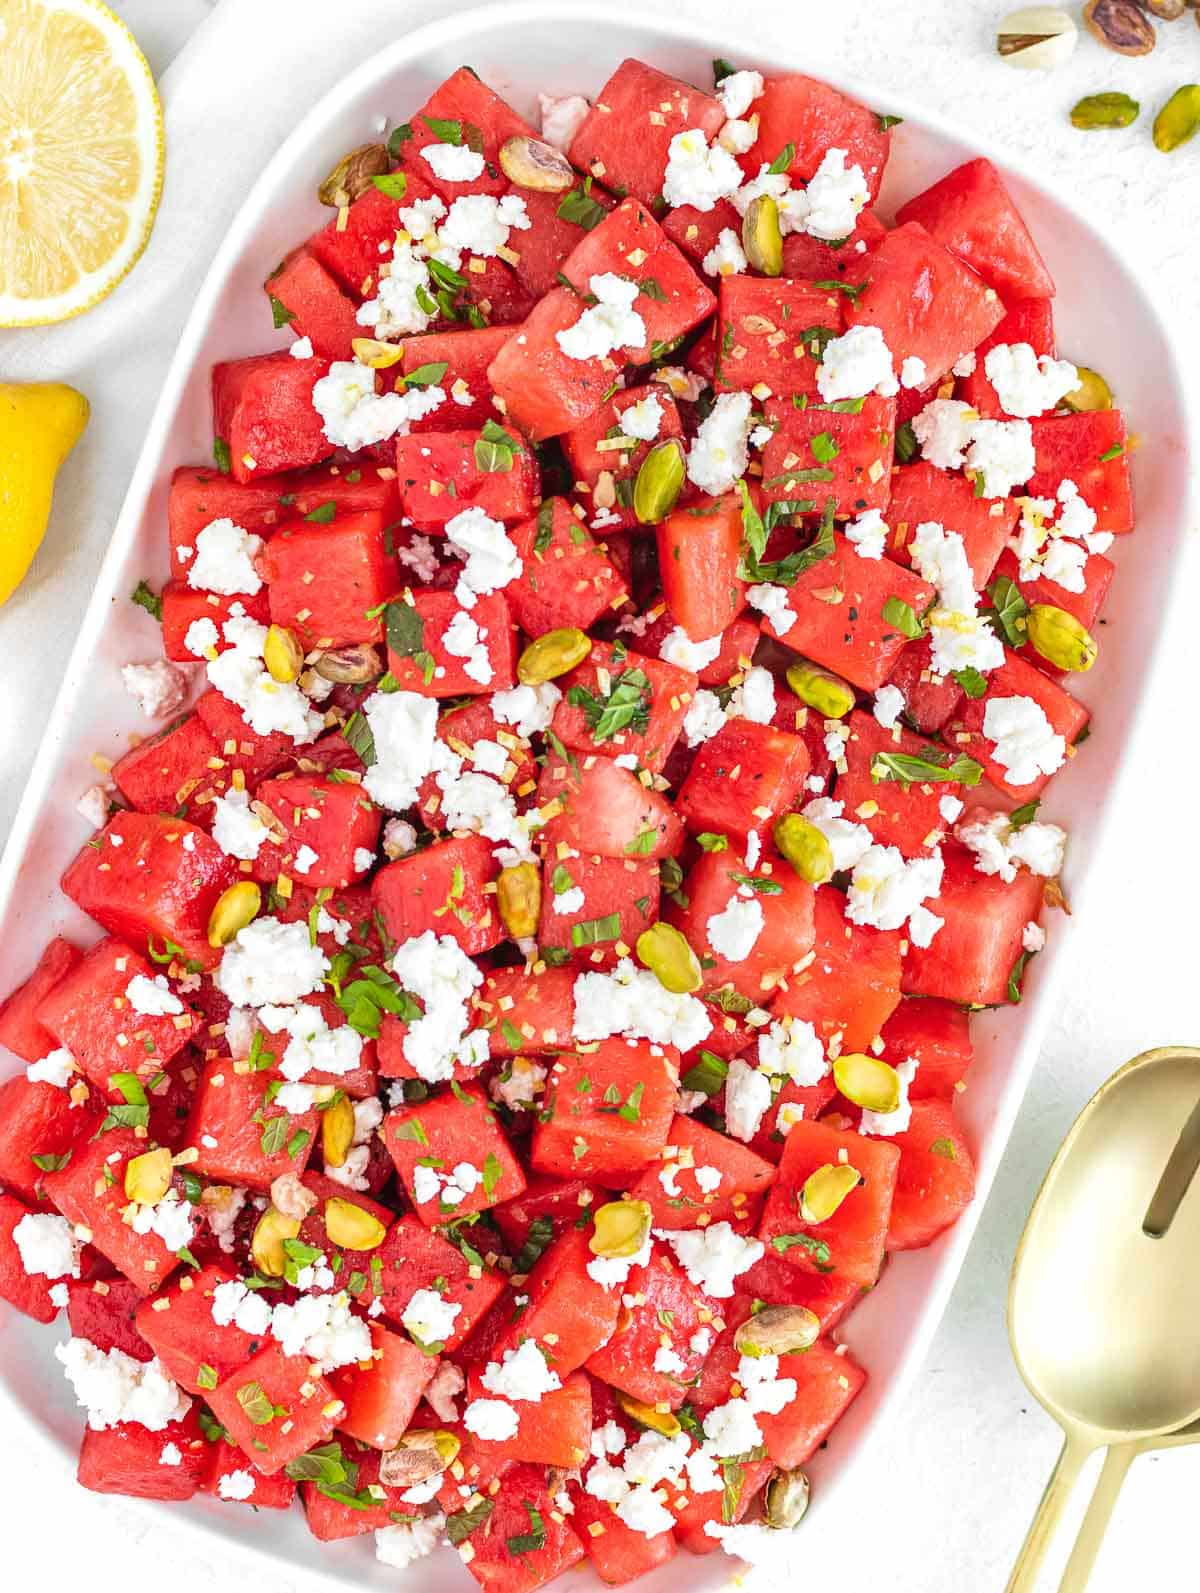 watermelon salad with feta cheese, mint leaves, and lemon